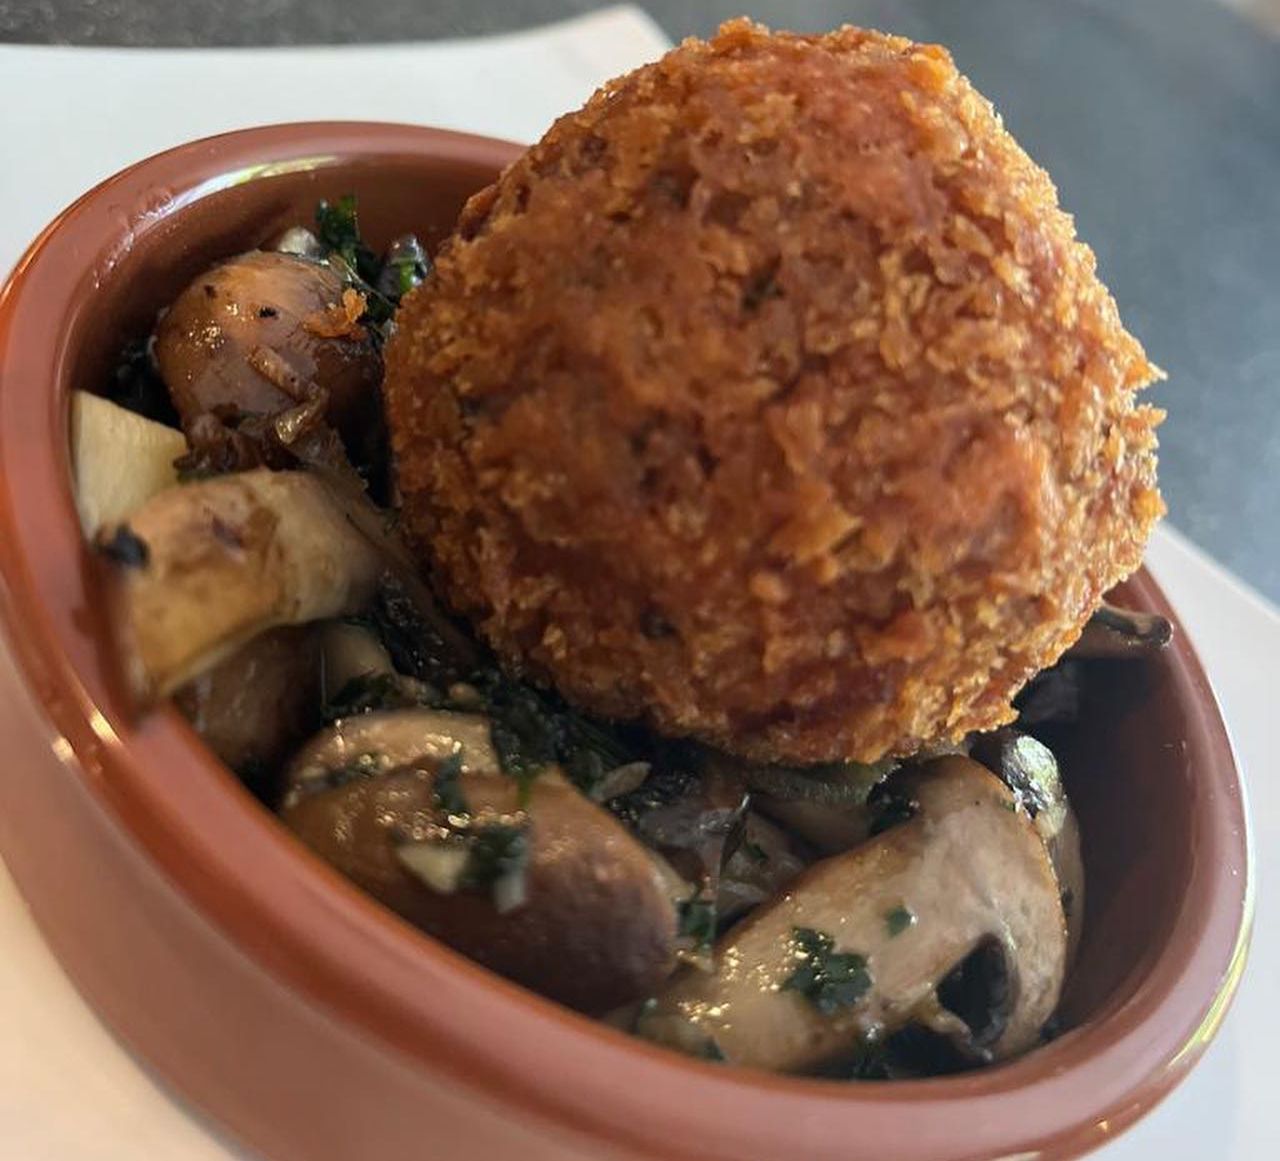 Mozzarella Arancini served on a bed of Garlic Mushrooms at Anelli Hotgel in Southport